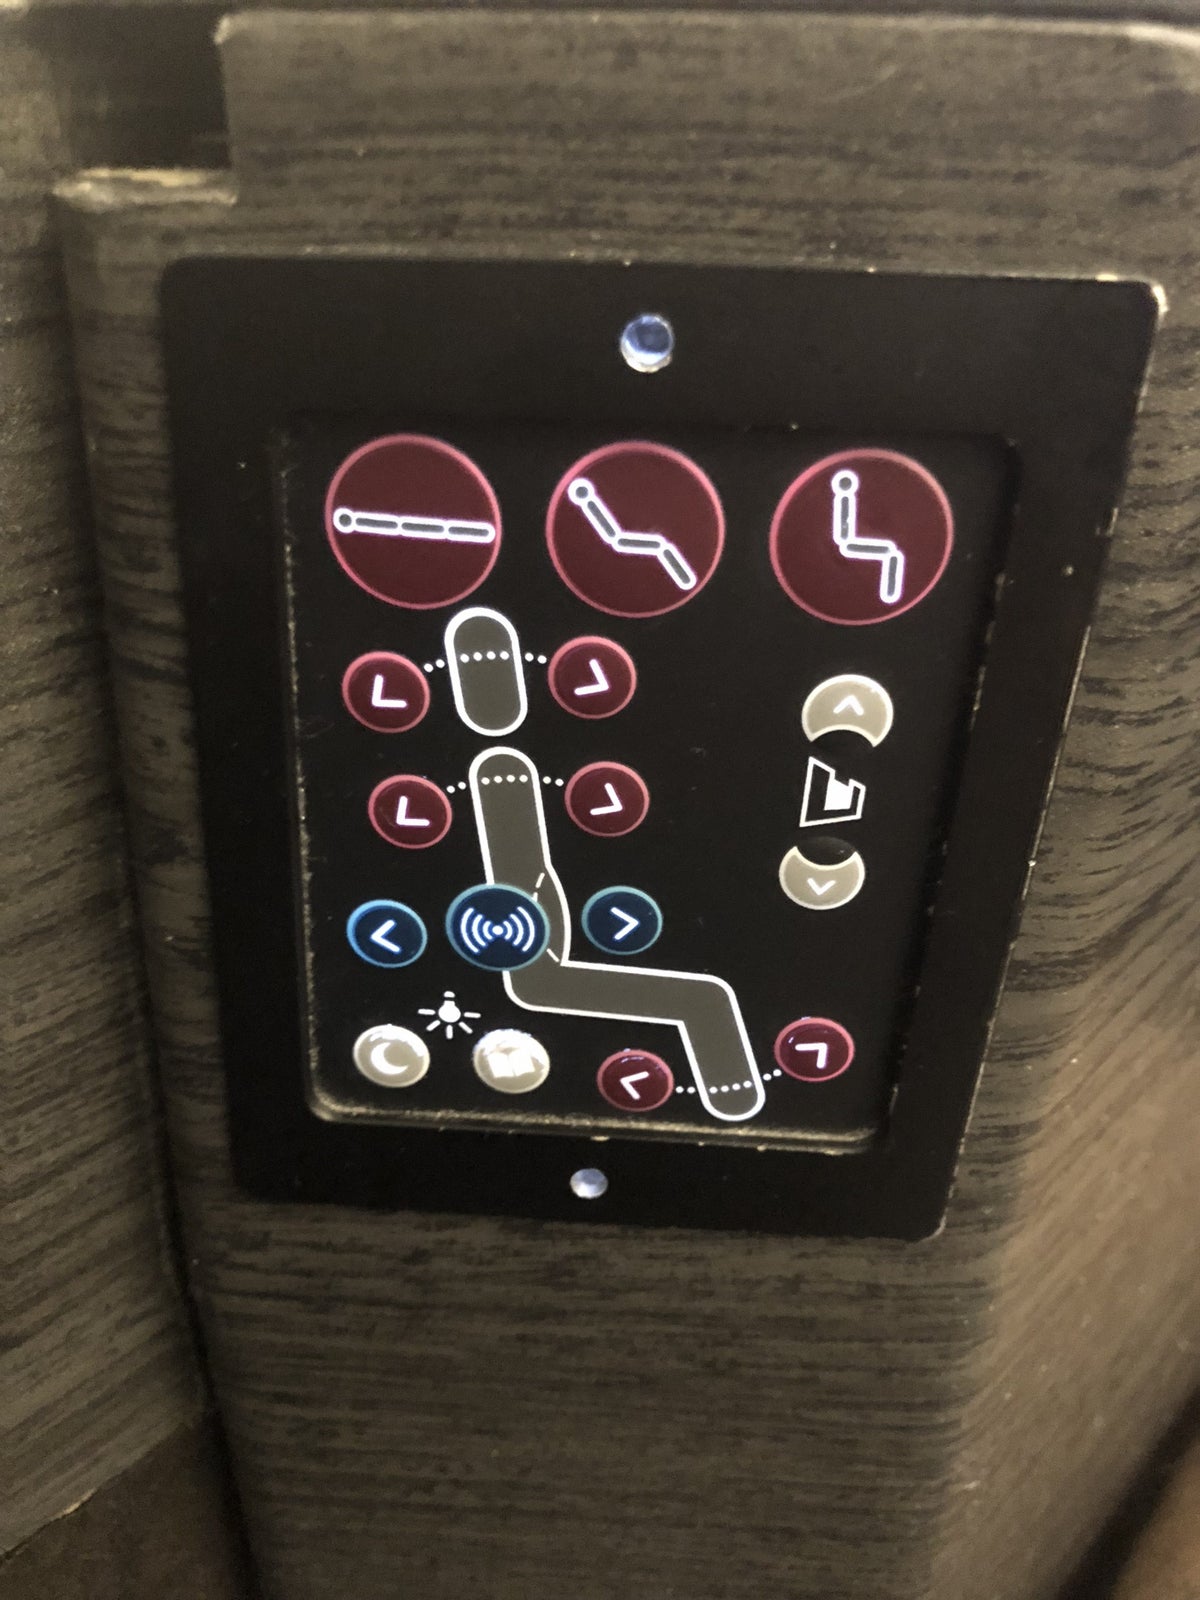 Japan Airlines 777 Business Class Seat Buttons